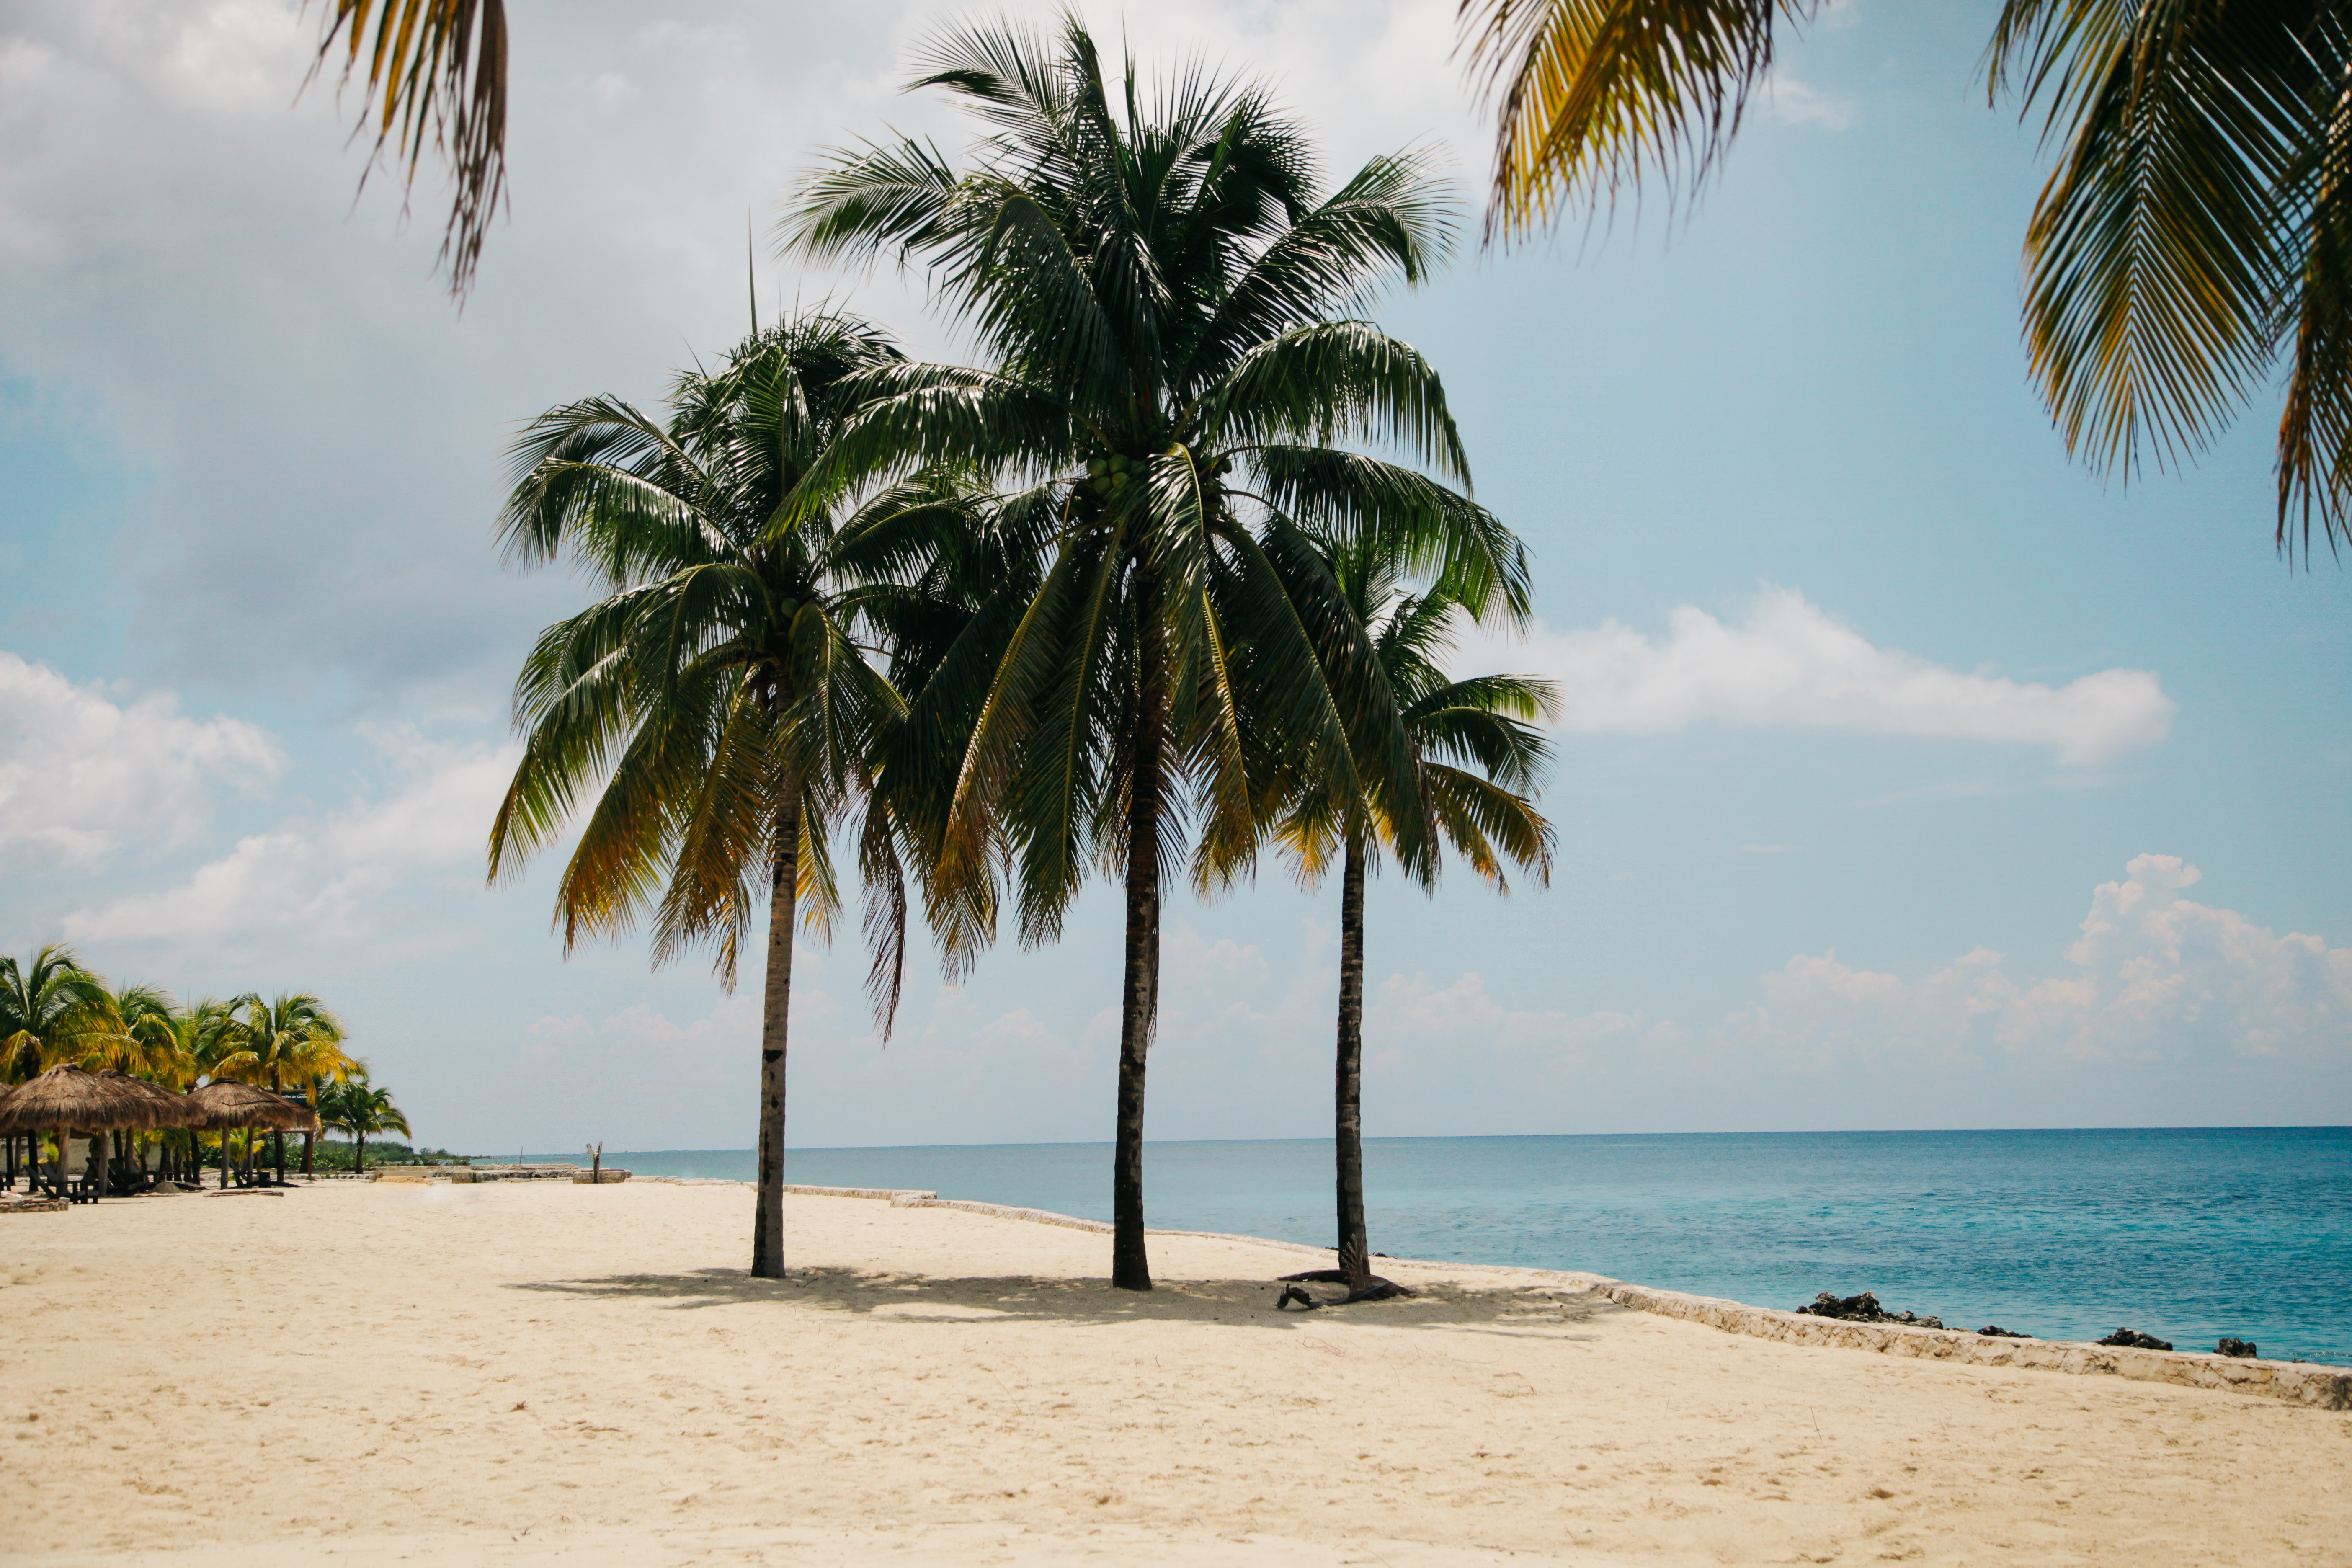 Coconut tree on the beach during daytime photo